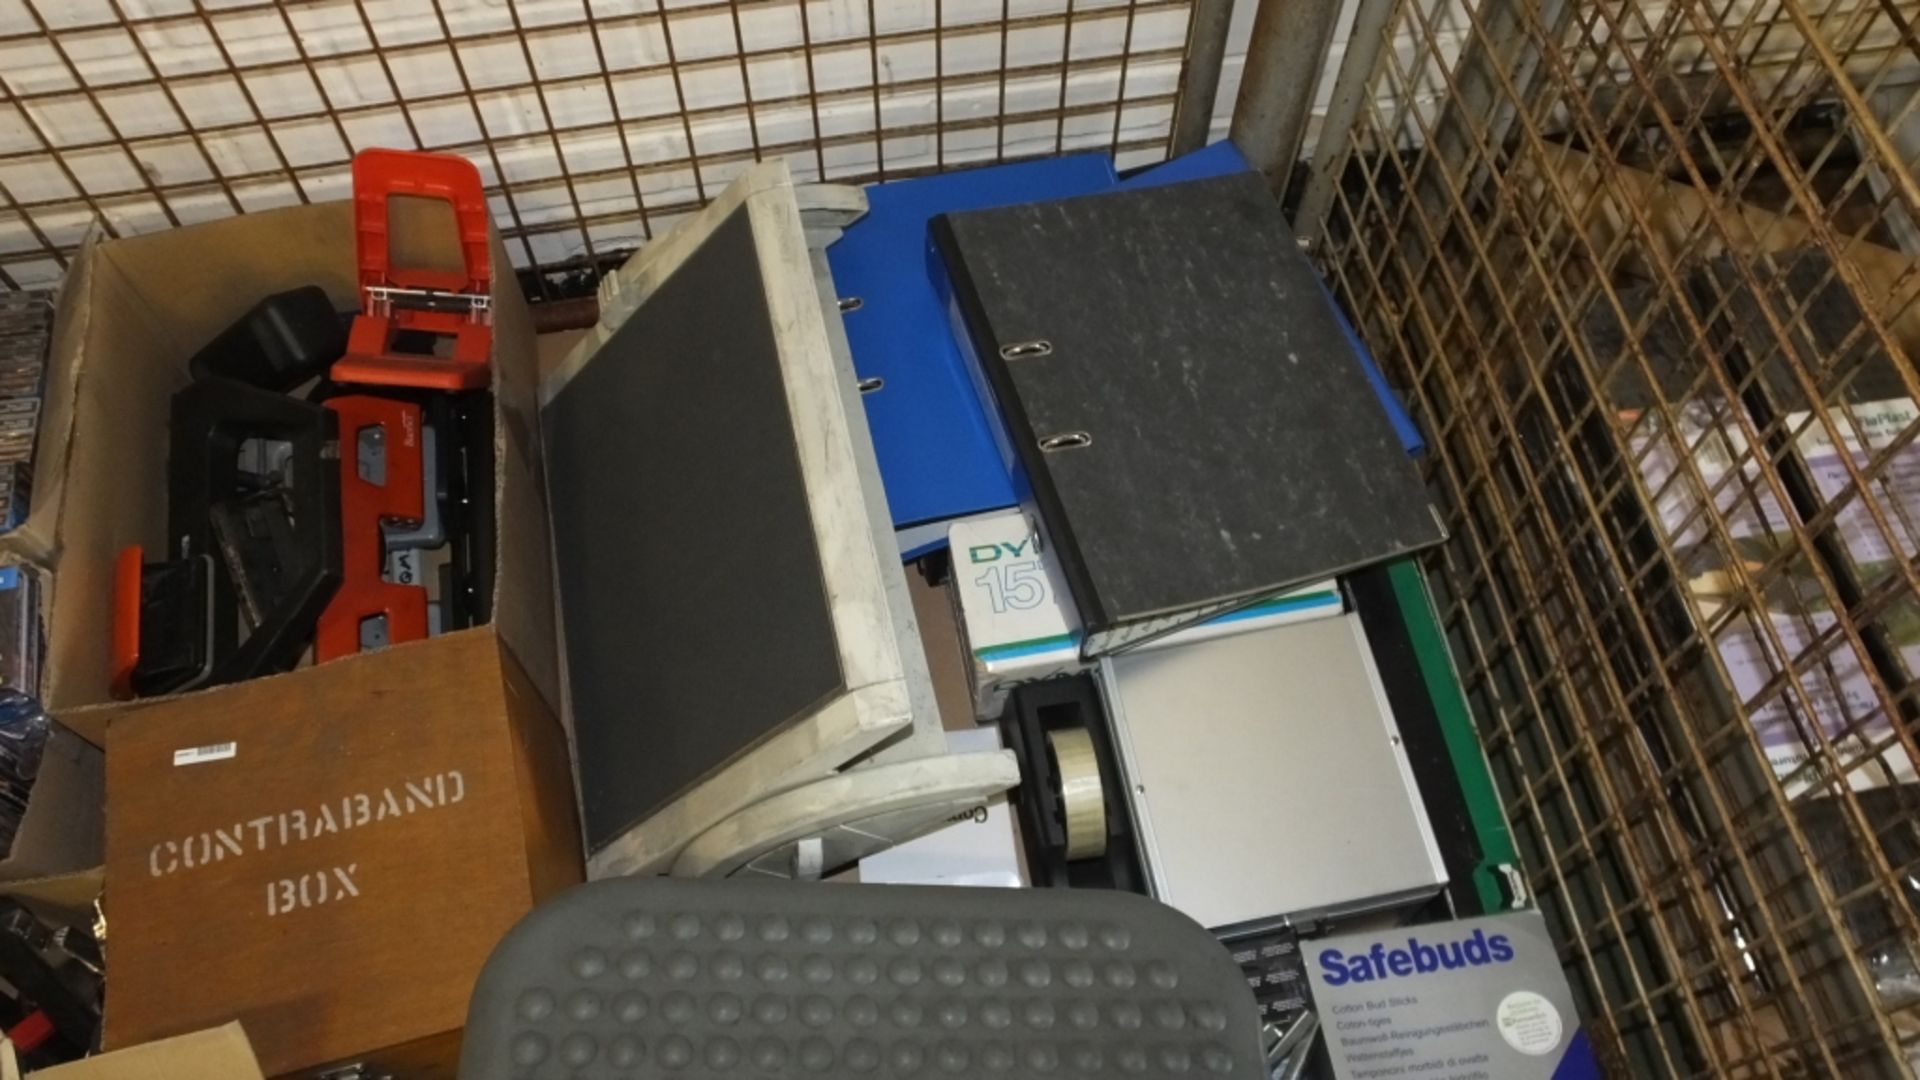 Office Equipment - Staples, Punches, Foot Rests, Folders - Image 5 of 5